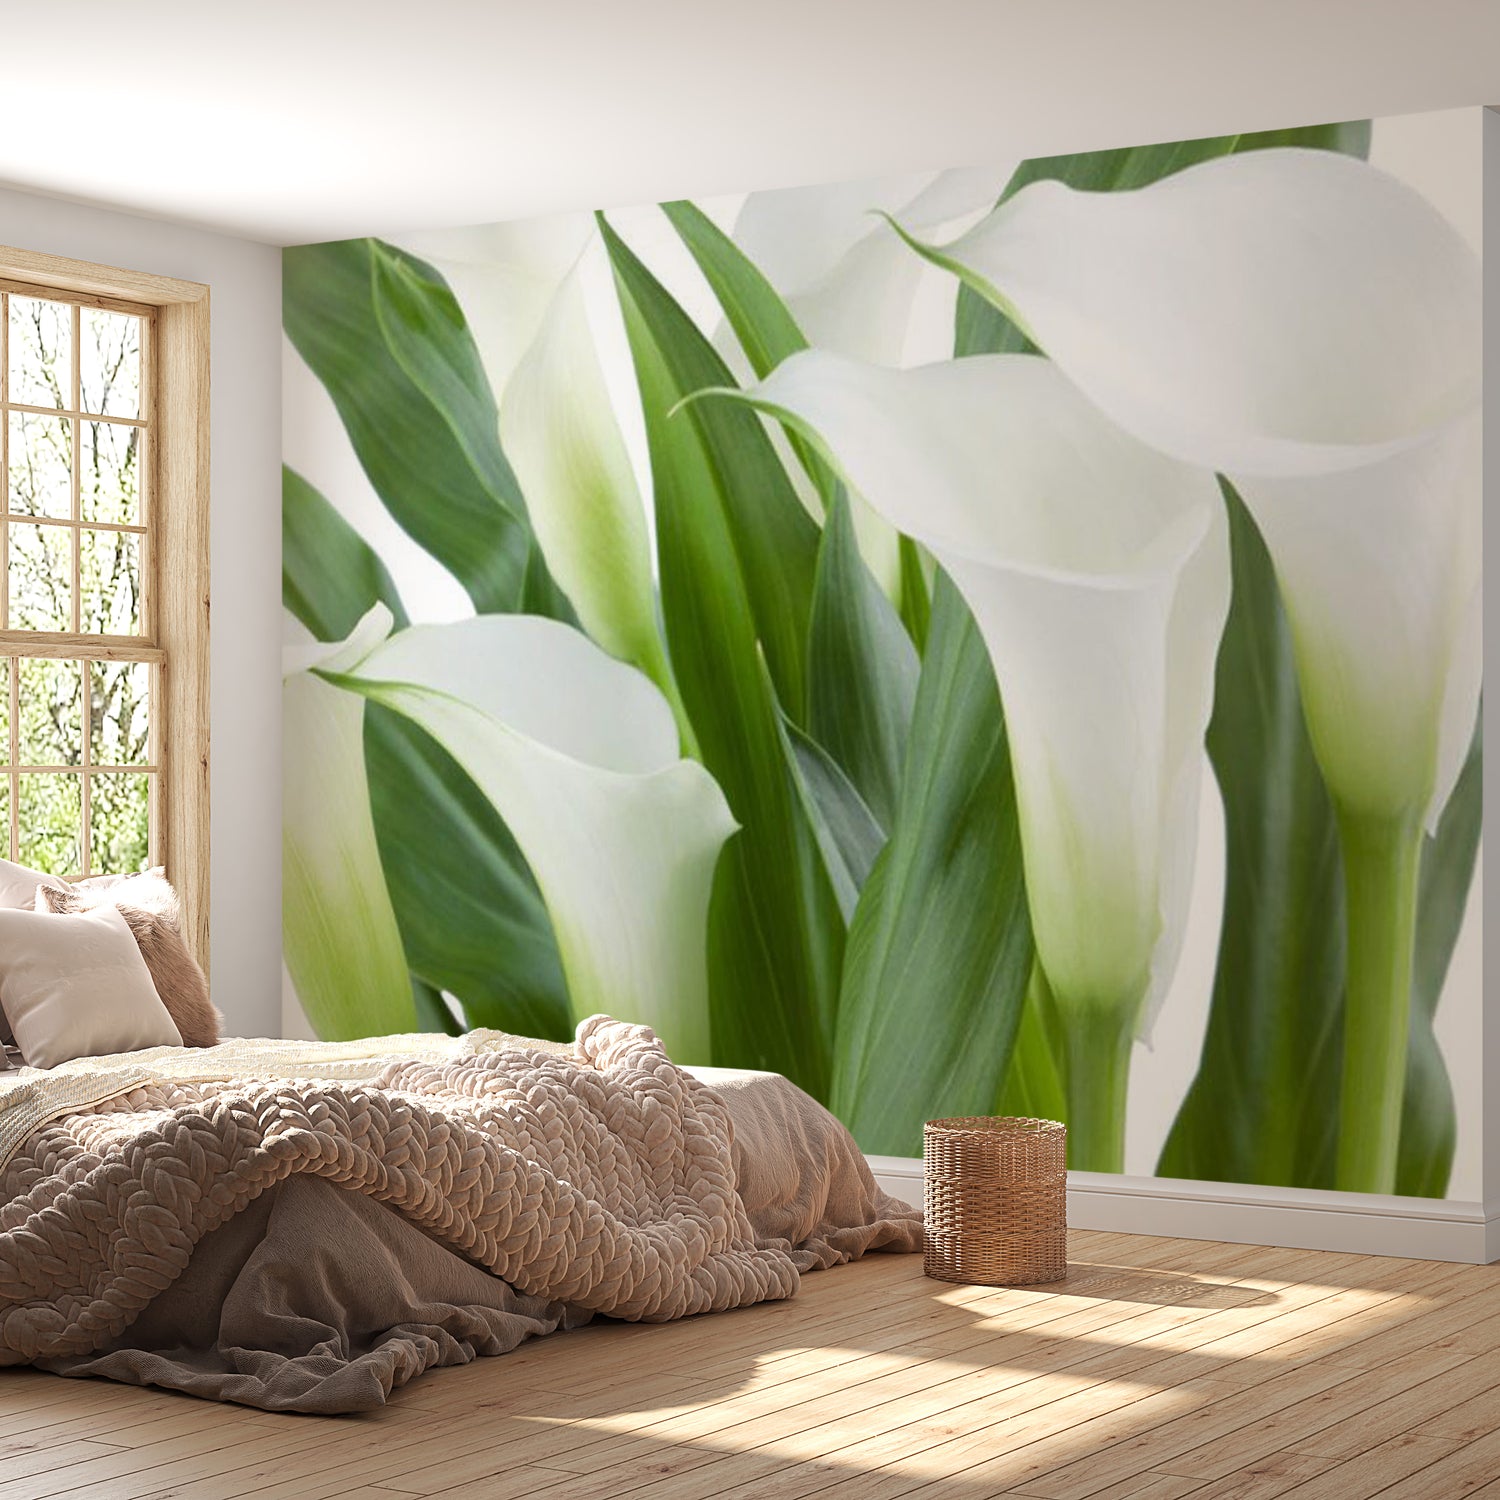 Floral Wallpaper Wall Mural - Bunch Of Flowers Callas